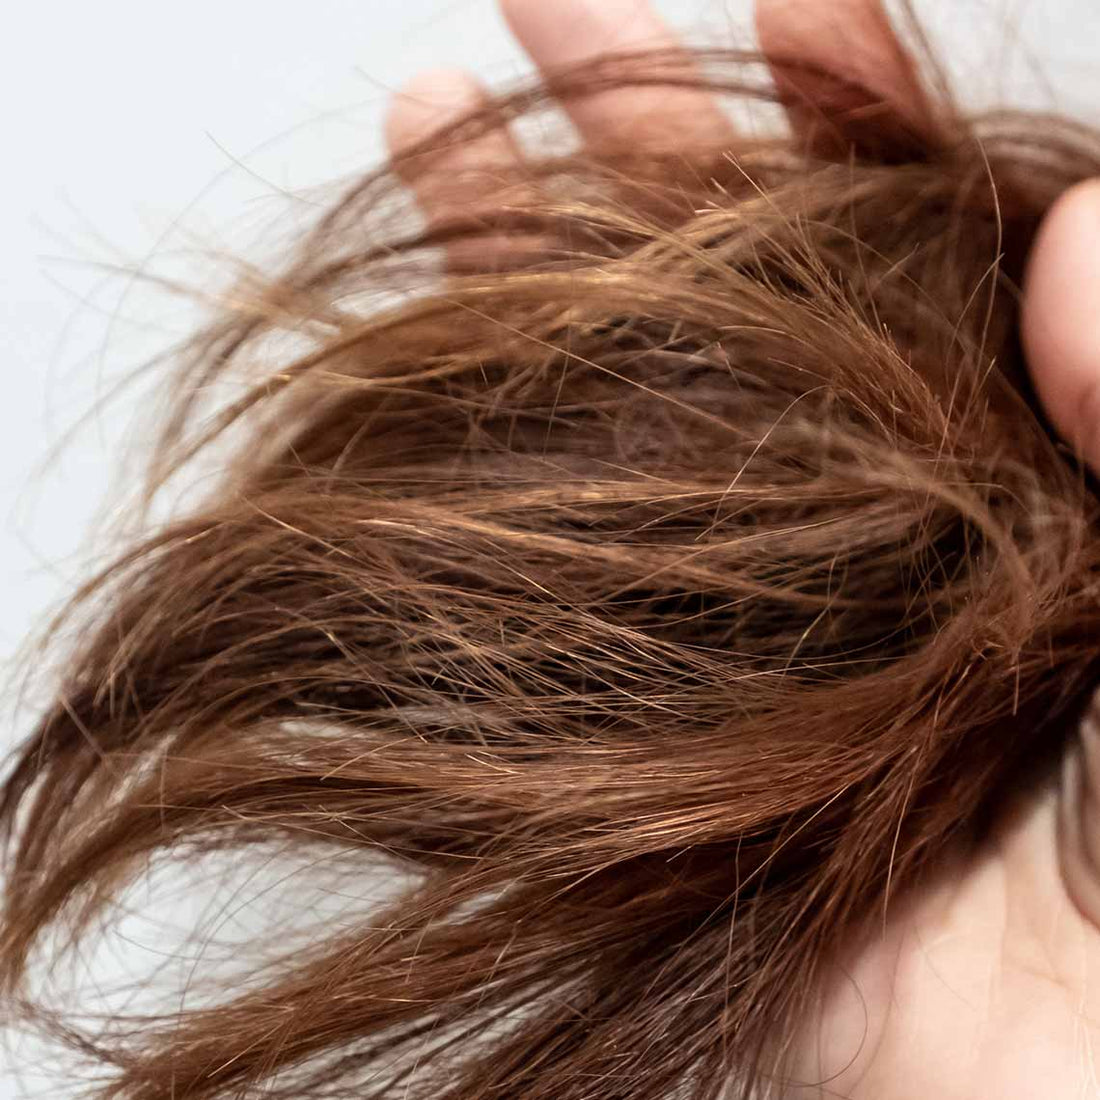 Troubled with frizzy hair? Here are the causes and treatment